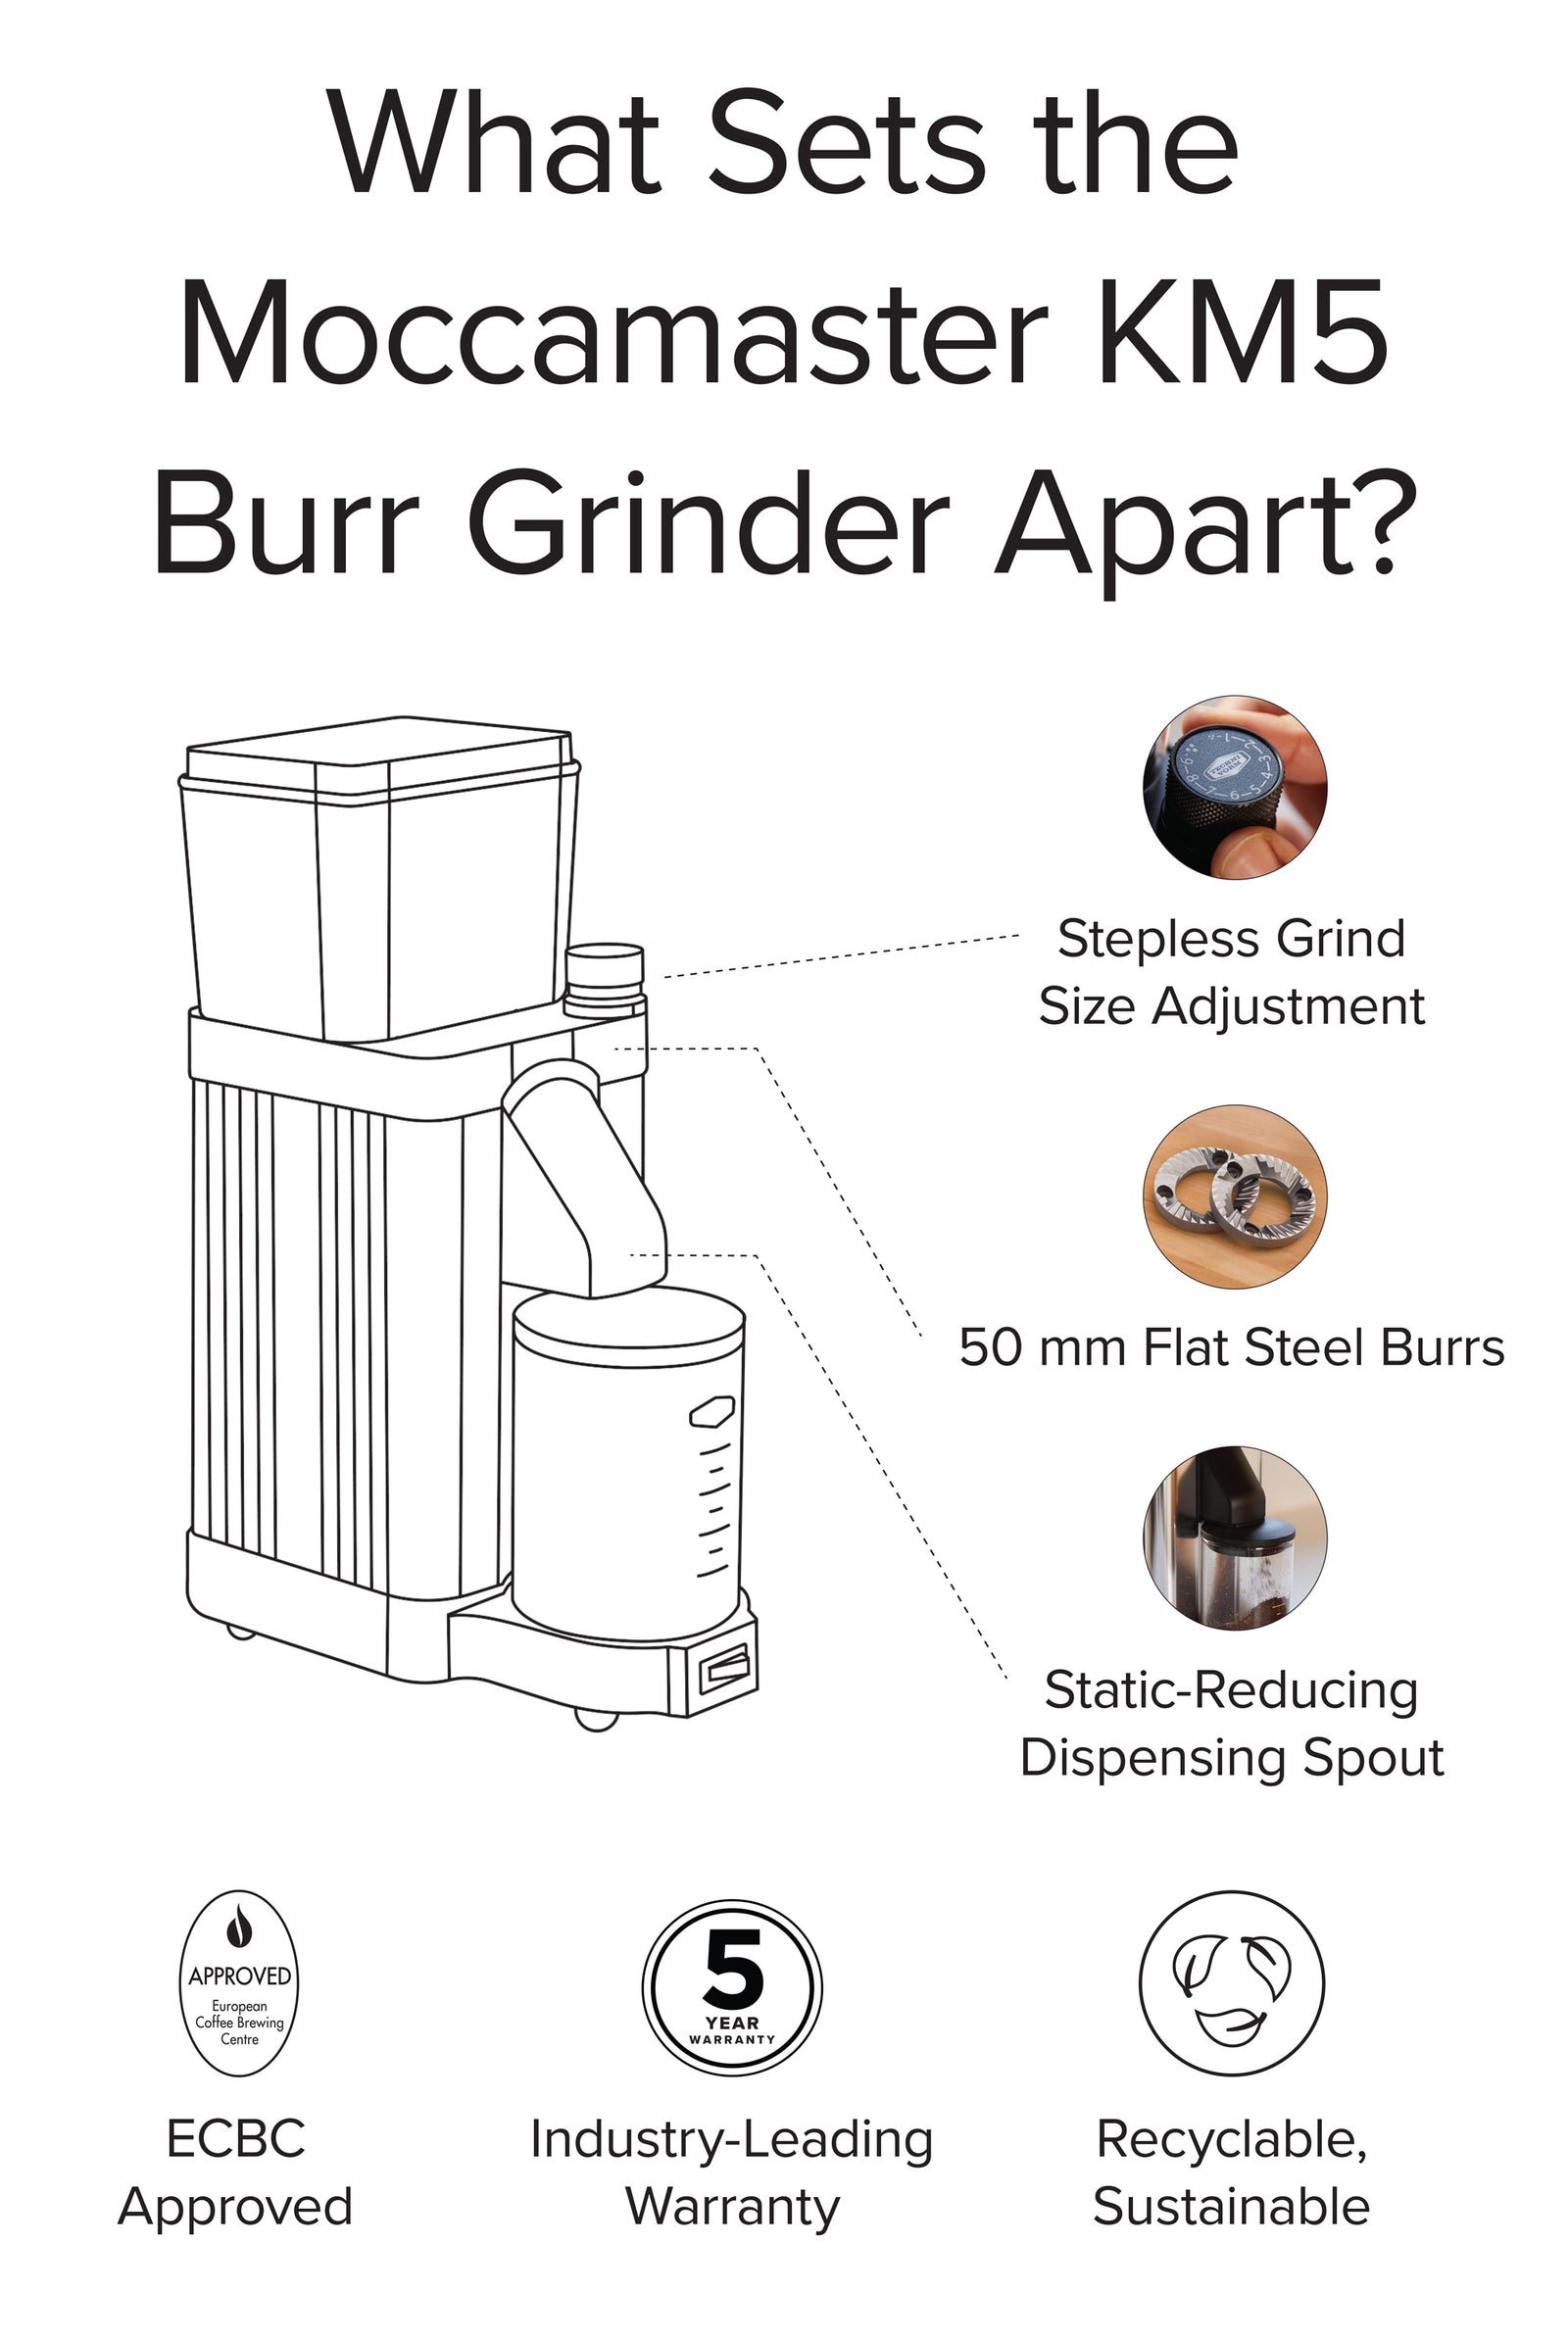 Moccamaster's luxurious KM5 Burr Grinder wants to level up your